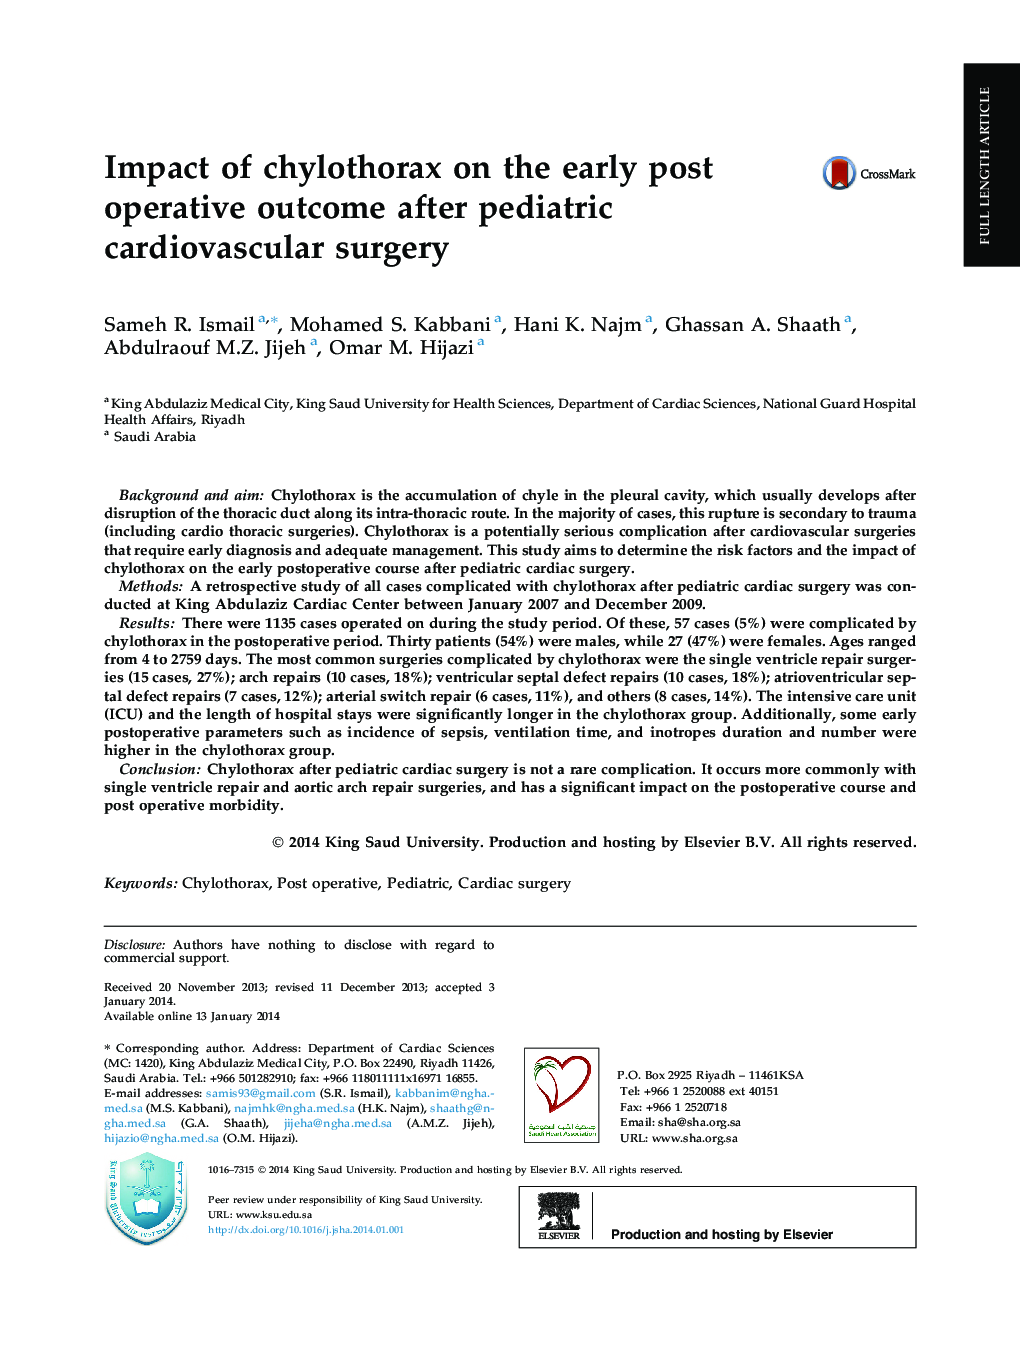 Impact of chylothorax on the early post operative outcome after pediatric cardiovascular surgery 